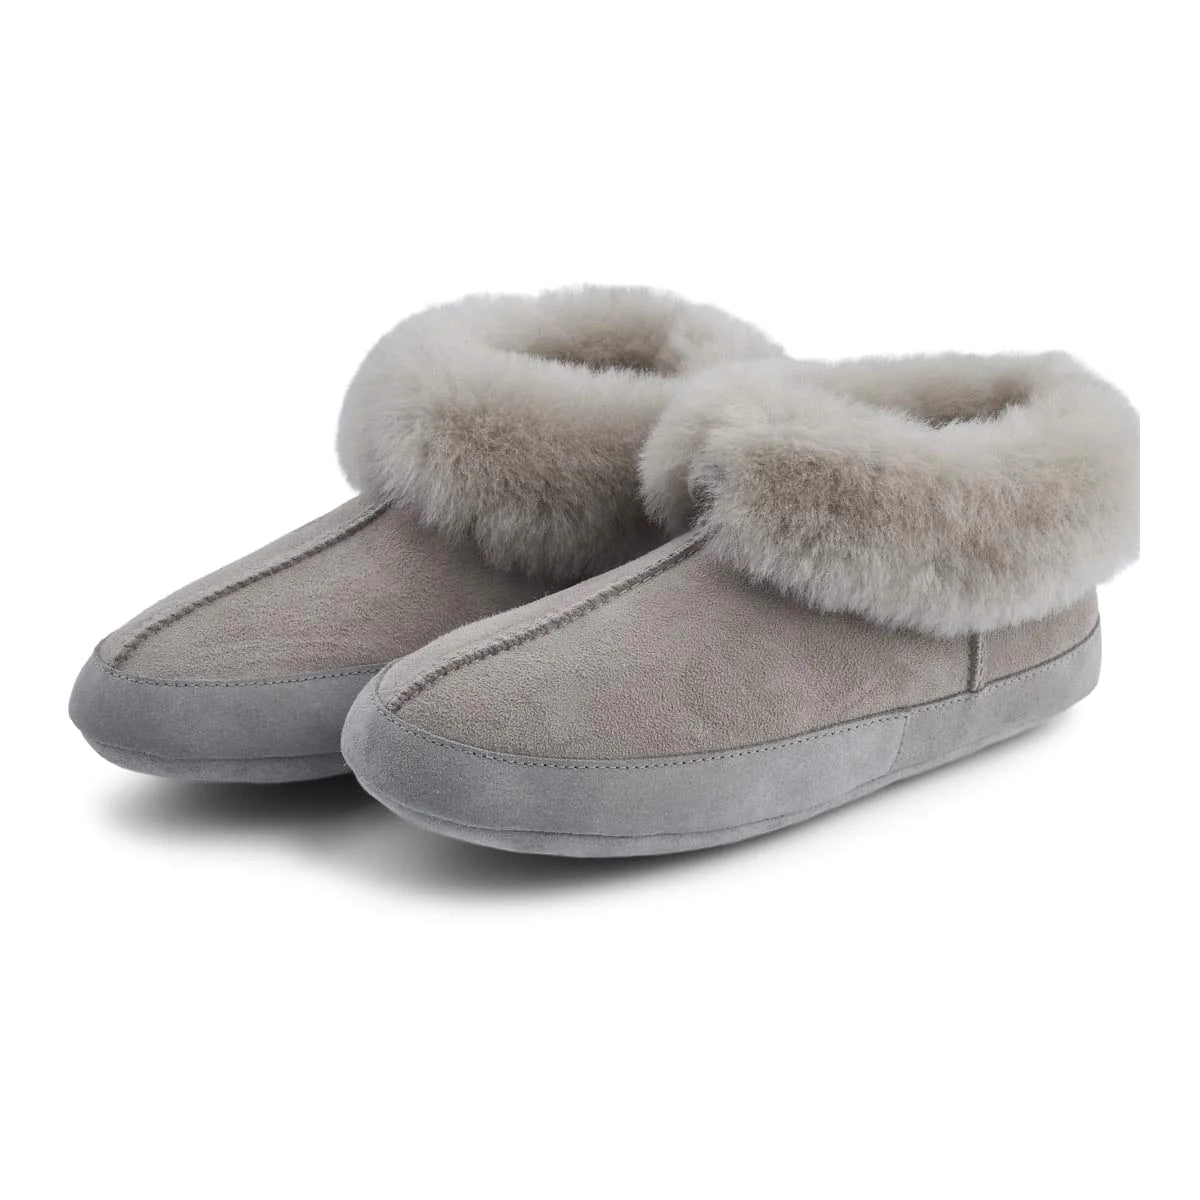 Soft Sole Slippers fra Natures Collection, Grå